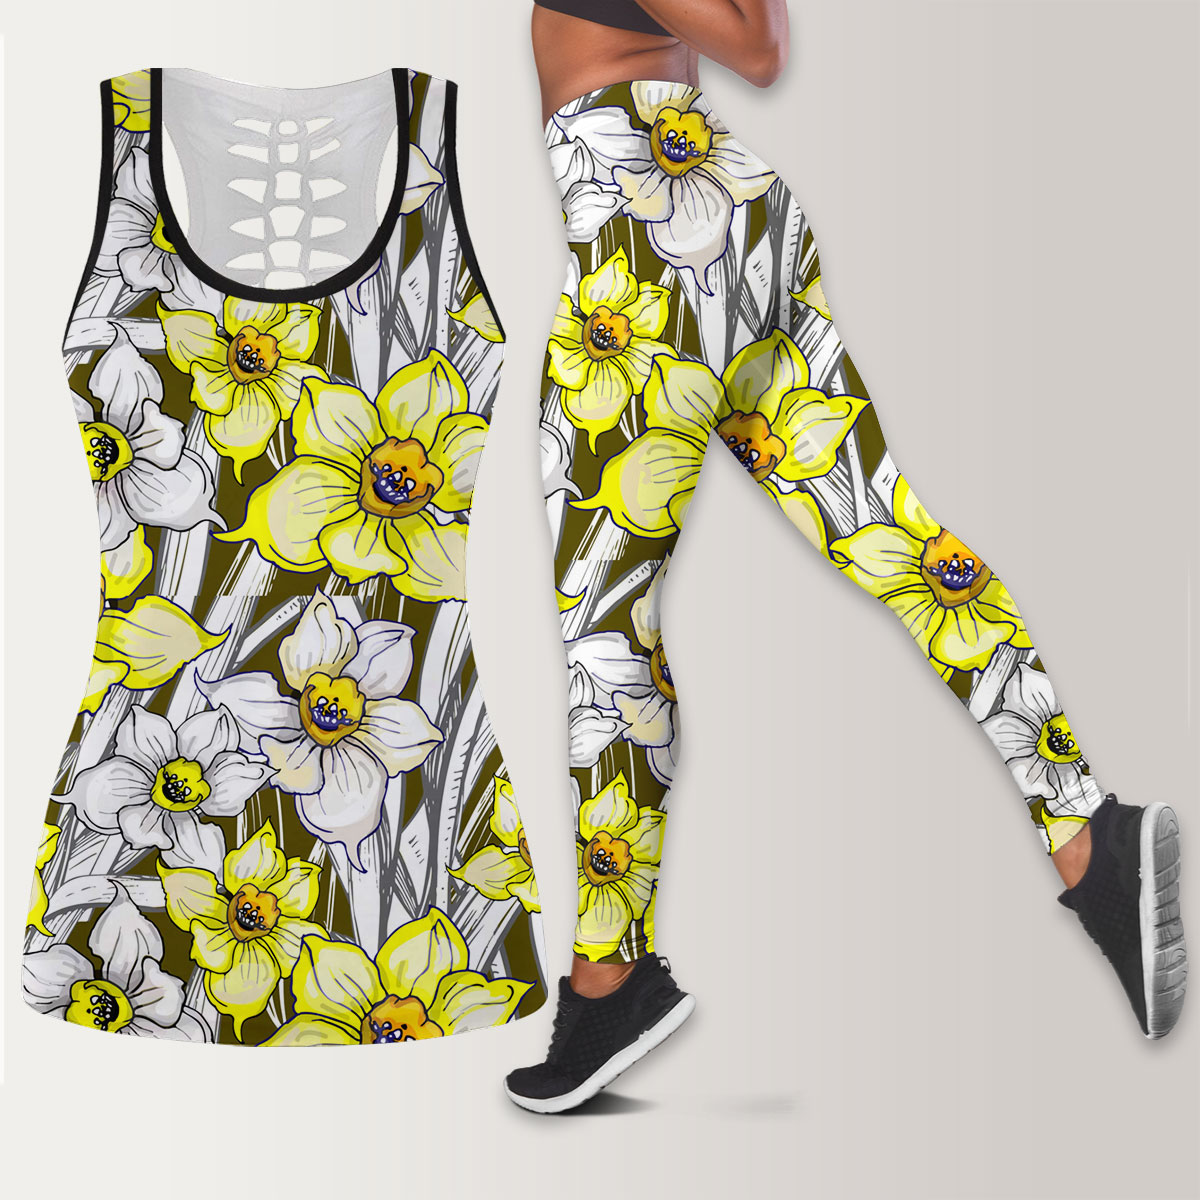 Botanical With Flowers Of Narcissus Daffodil Legging Tank Top set